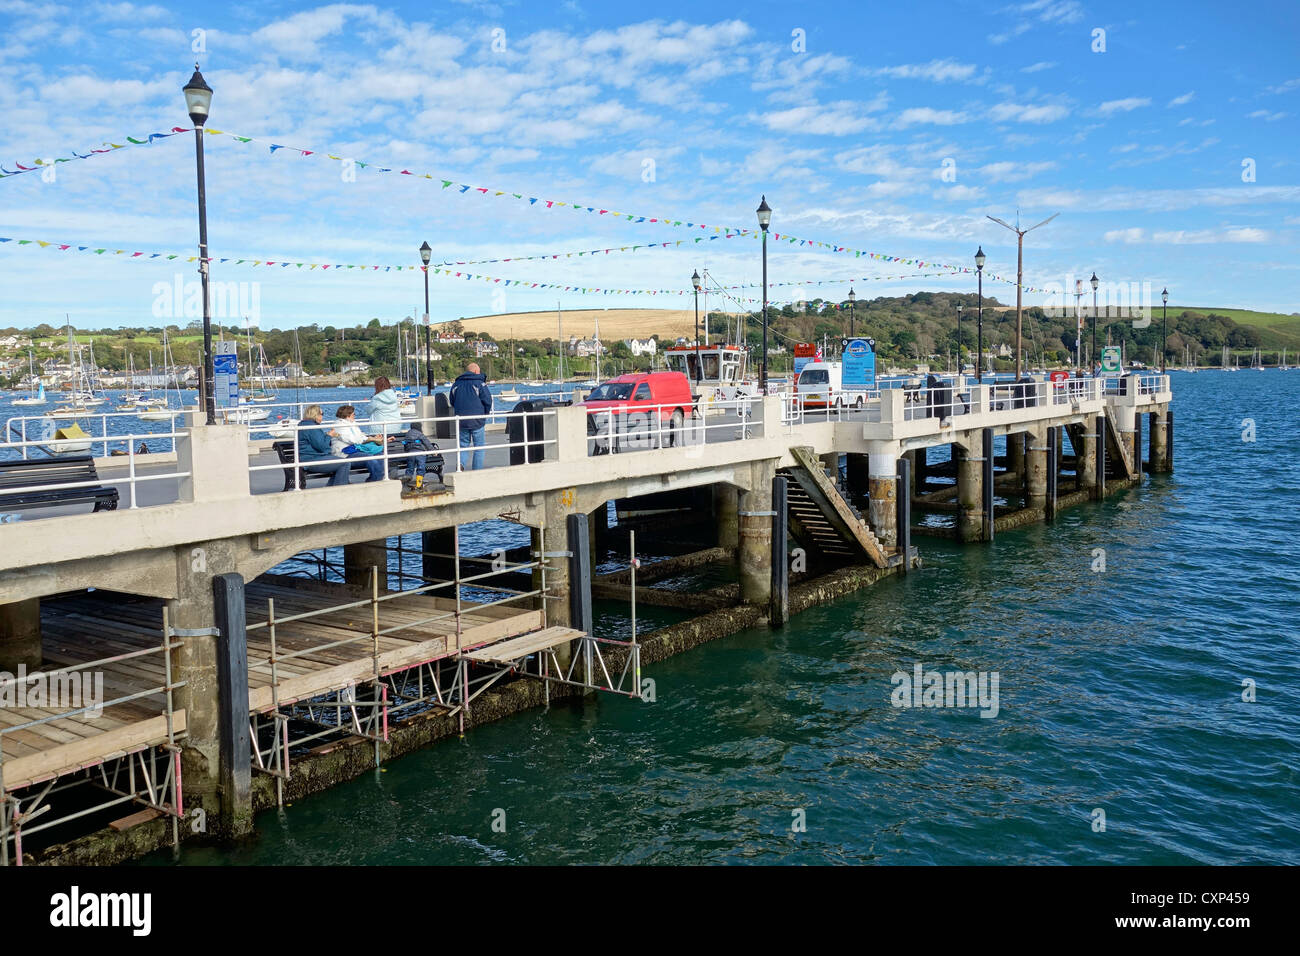 Prince of Wales pier in Falmouth, Cornwall England UK. Stock Photo